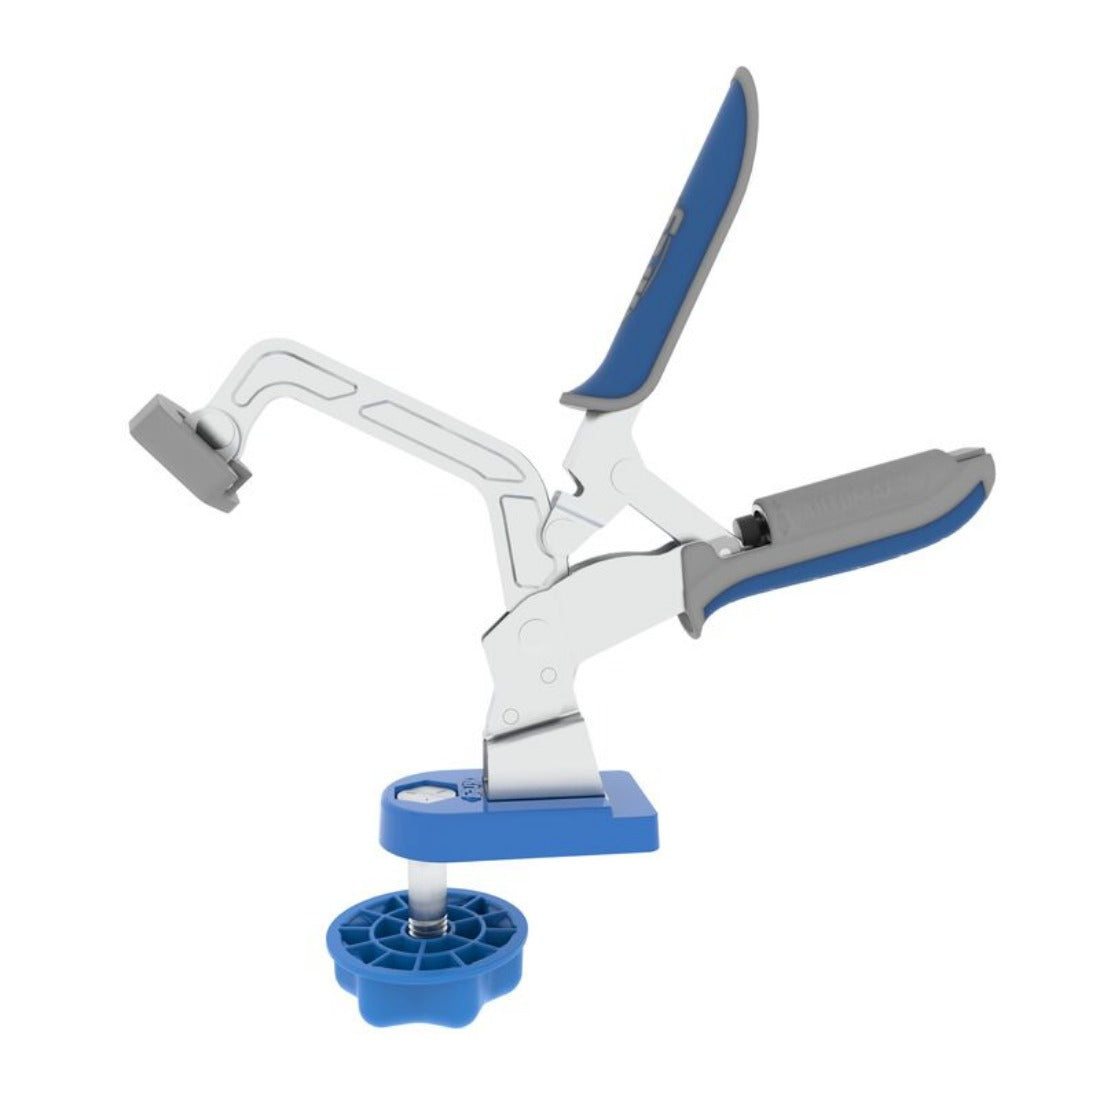 Kreg Bench Clamp with Bench Clamp Base show in open position